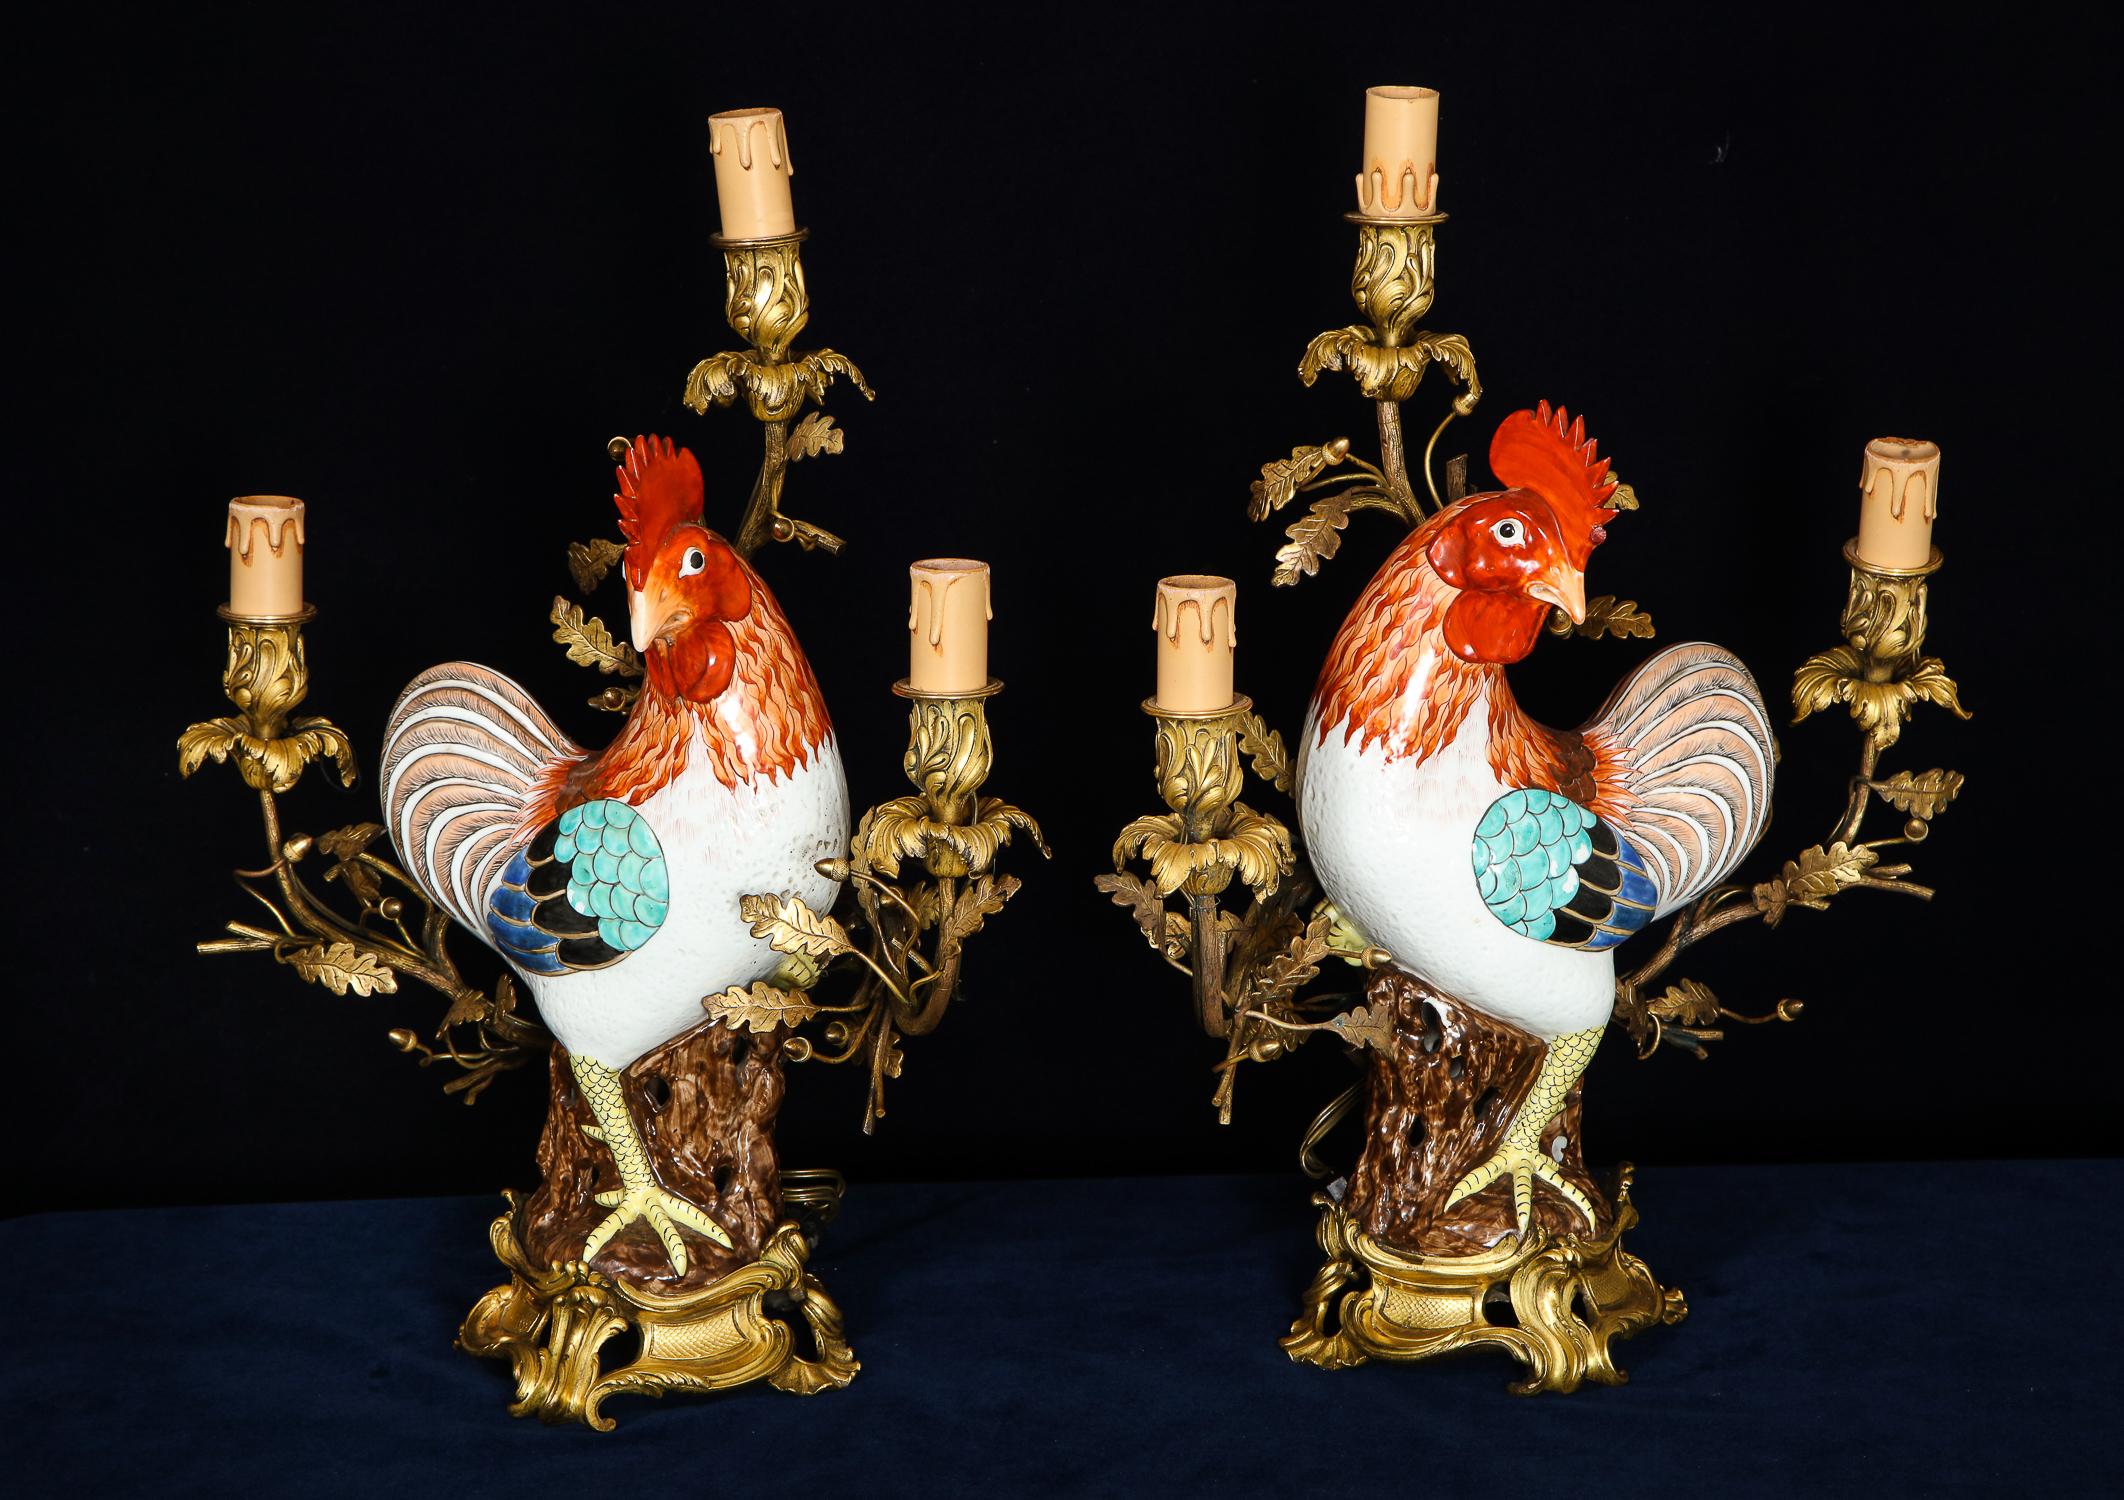 Hand-Painted Pair of Chinese Export Rooster Louis XVI Style Gilt Bronze-Mounted Candelabras For Sale